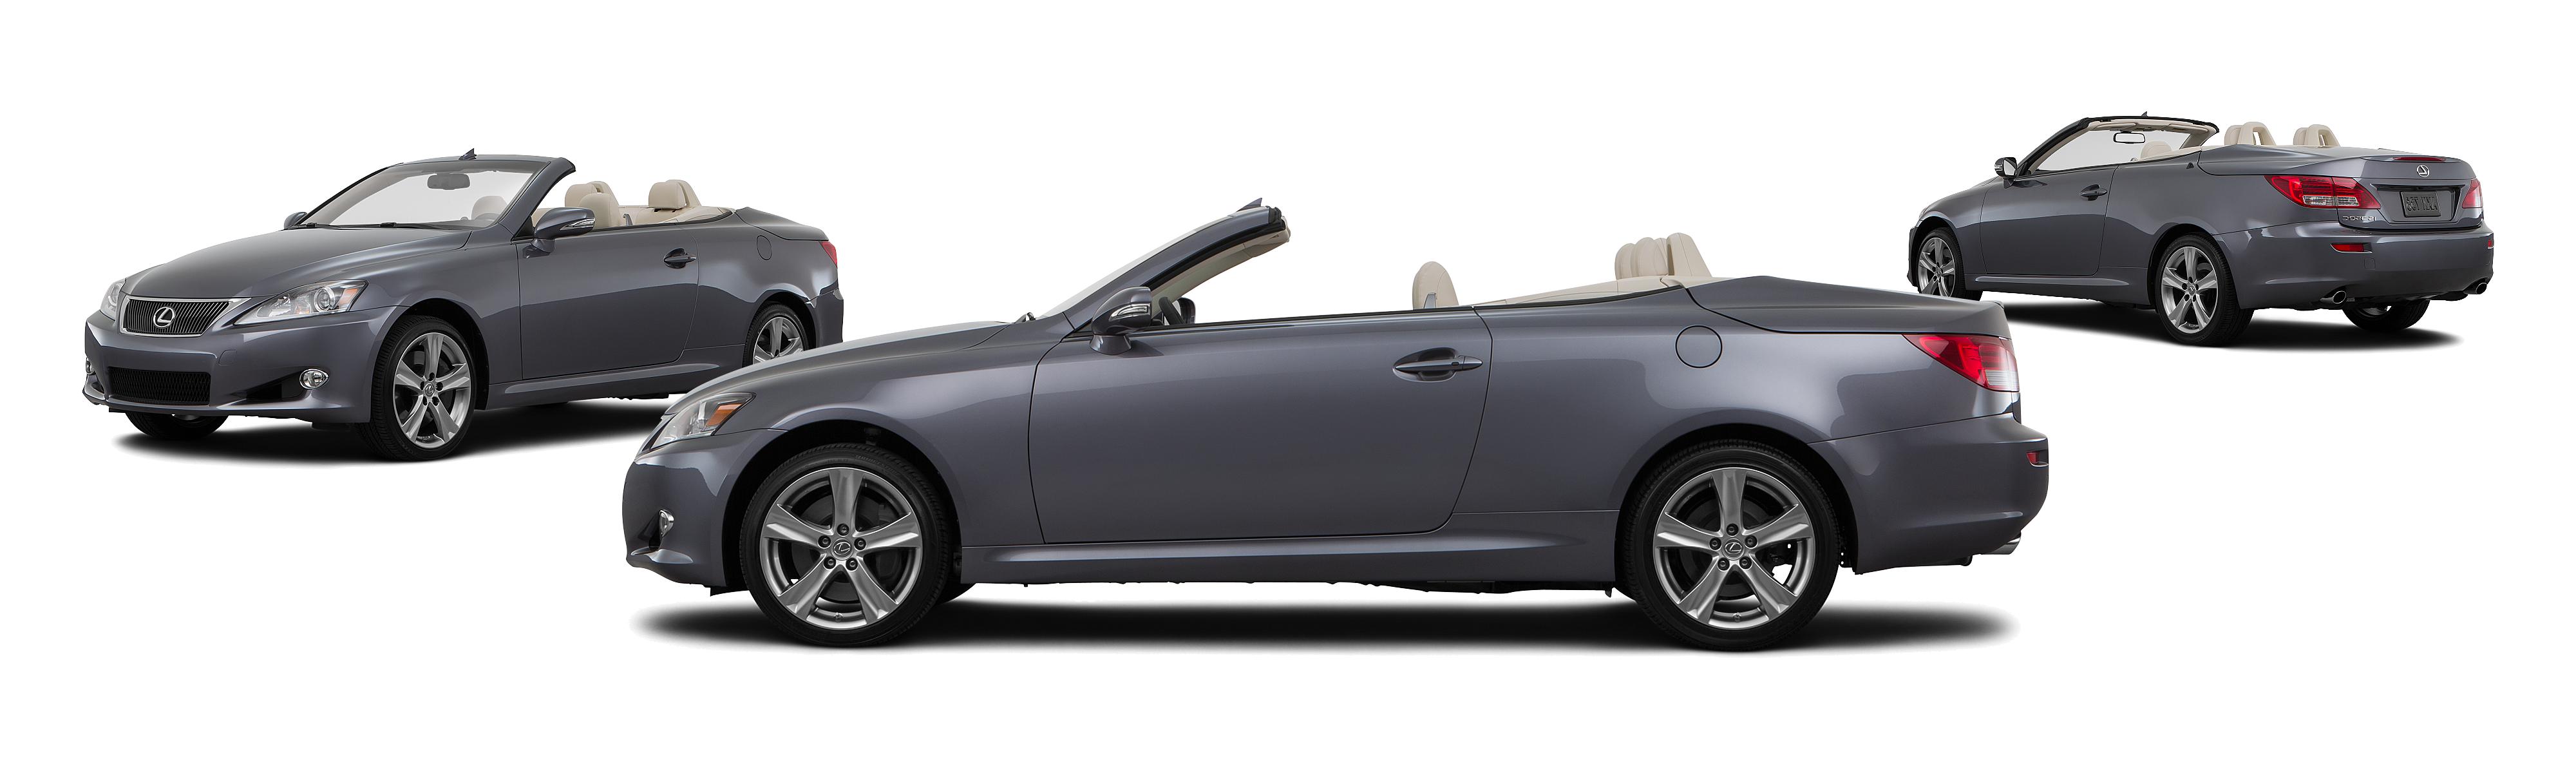 2015 Lexus IS 350C 2dr Convertible - Research - GrooveCar